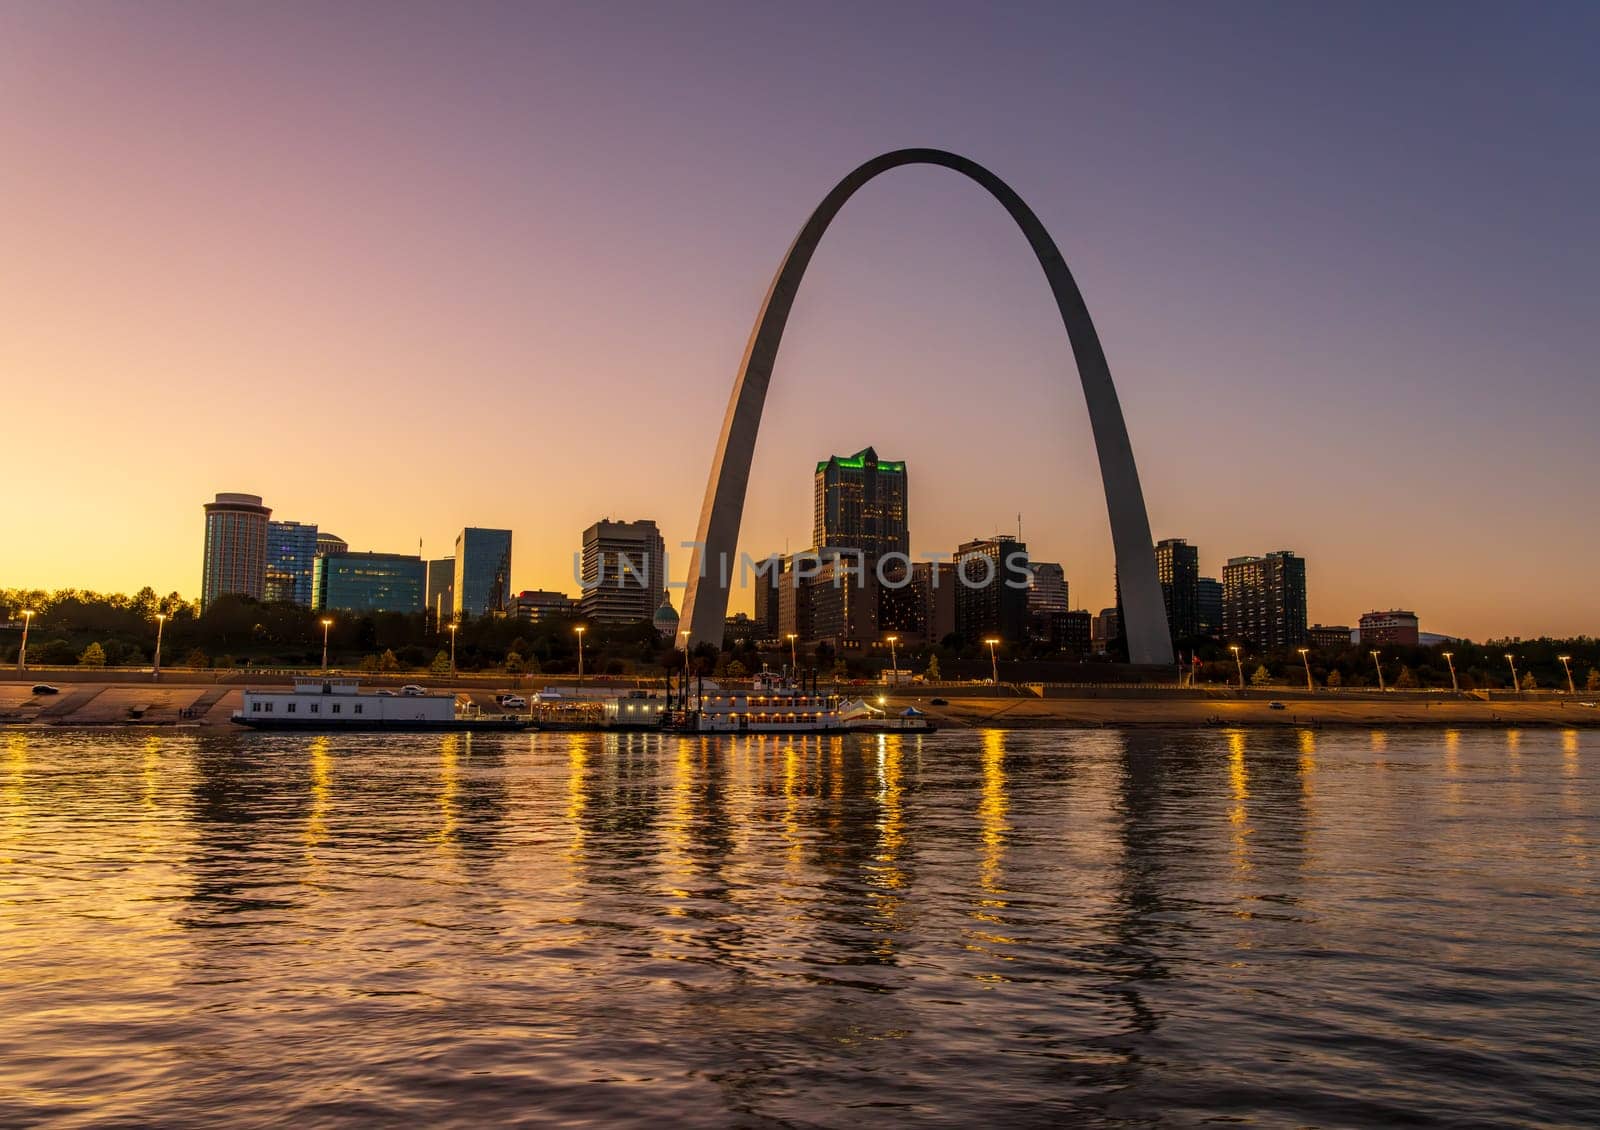 Low water levels in Mississippi river with reflections of the Gateway arch towering over the riverbank at glowing sunset and dusk